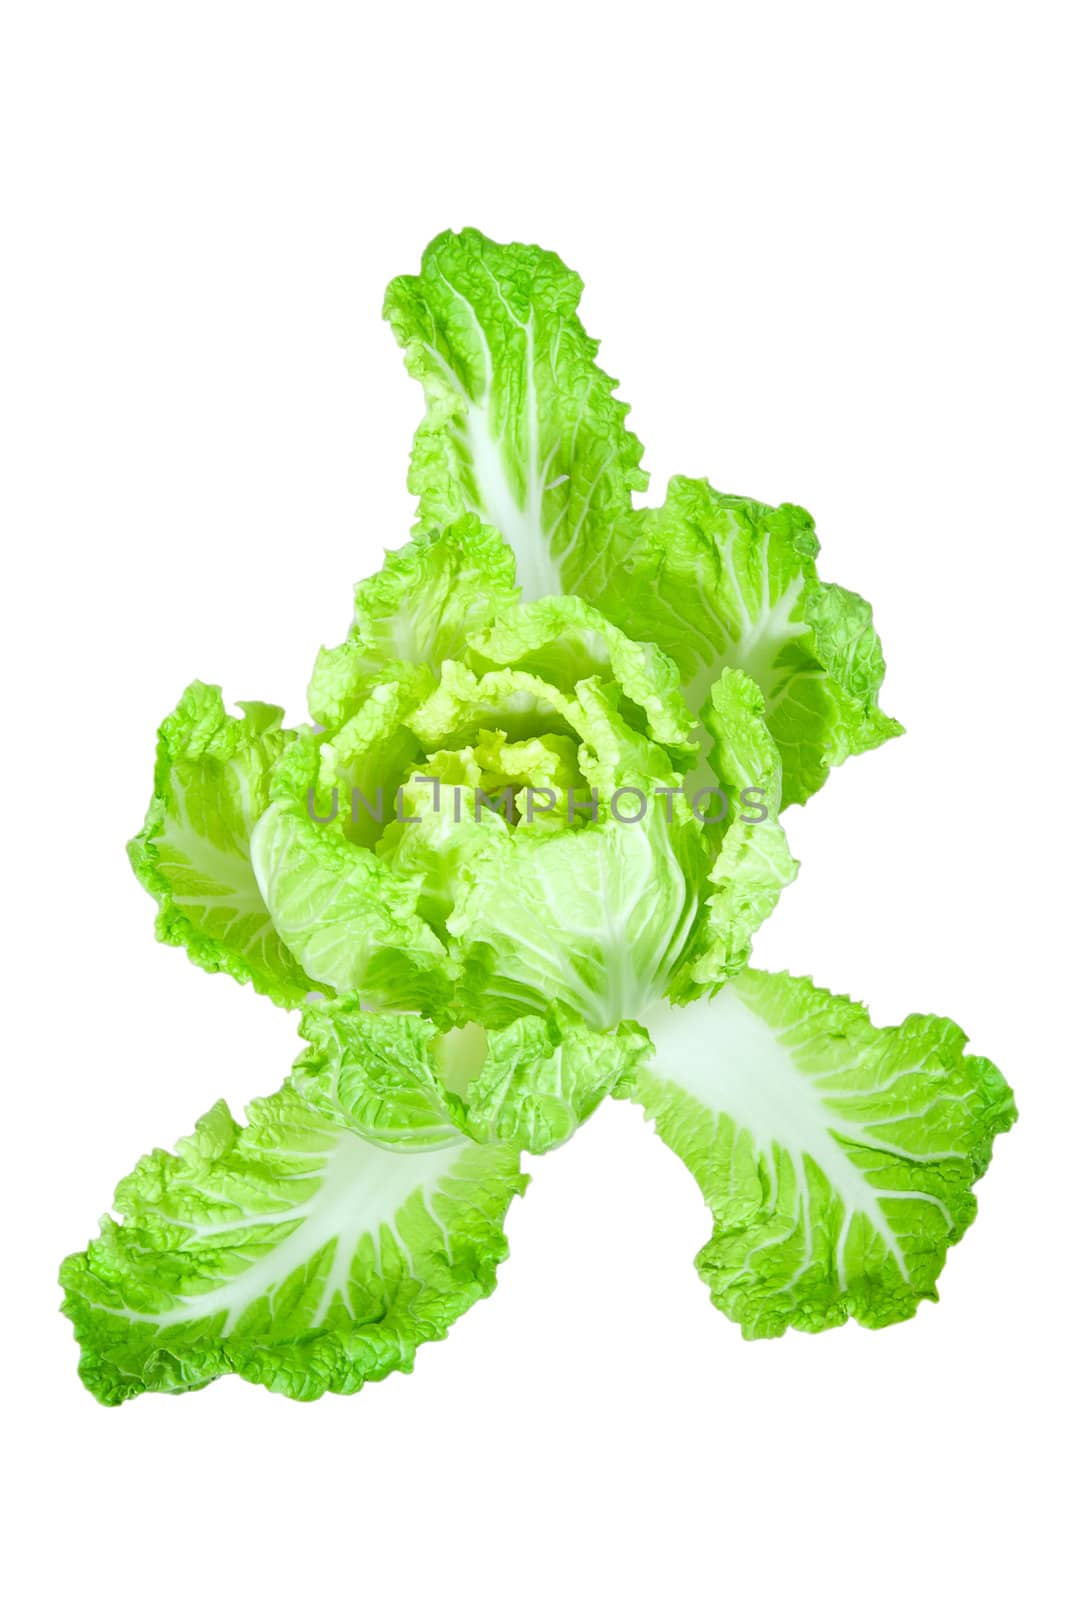 Chinese Cabbage by Sergius